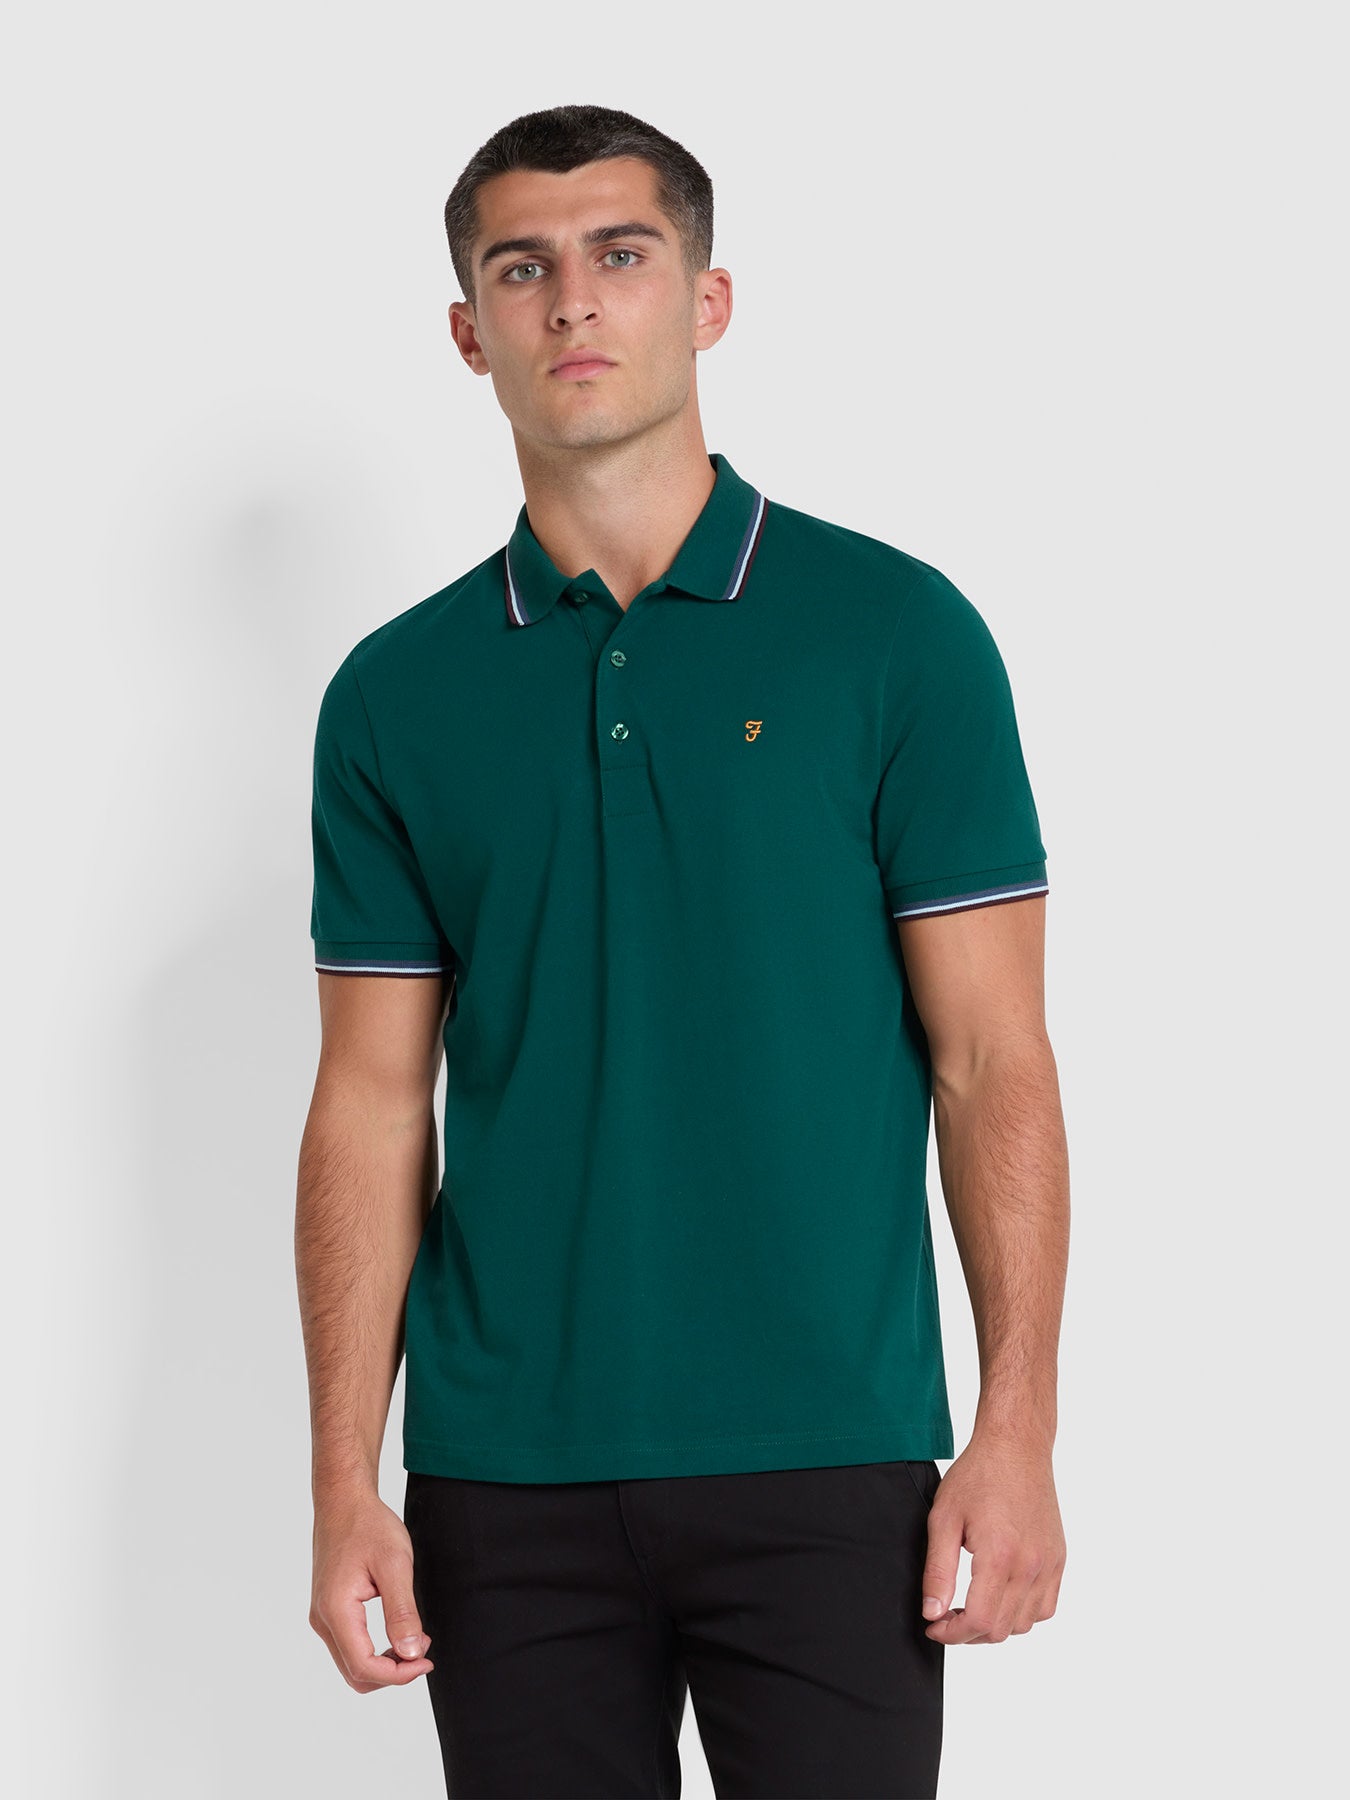 View Alvin Organic Cotton Tipped Collar Short Sleeve Polo Shirt In Botanic information